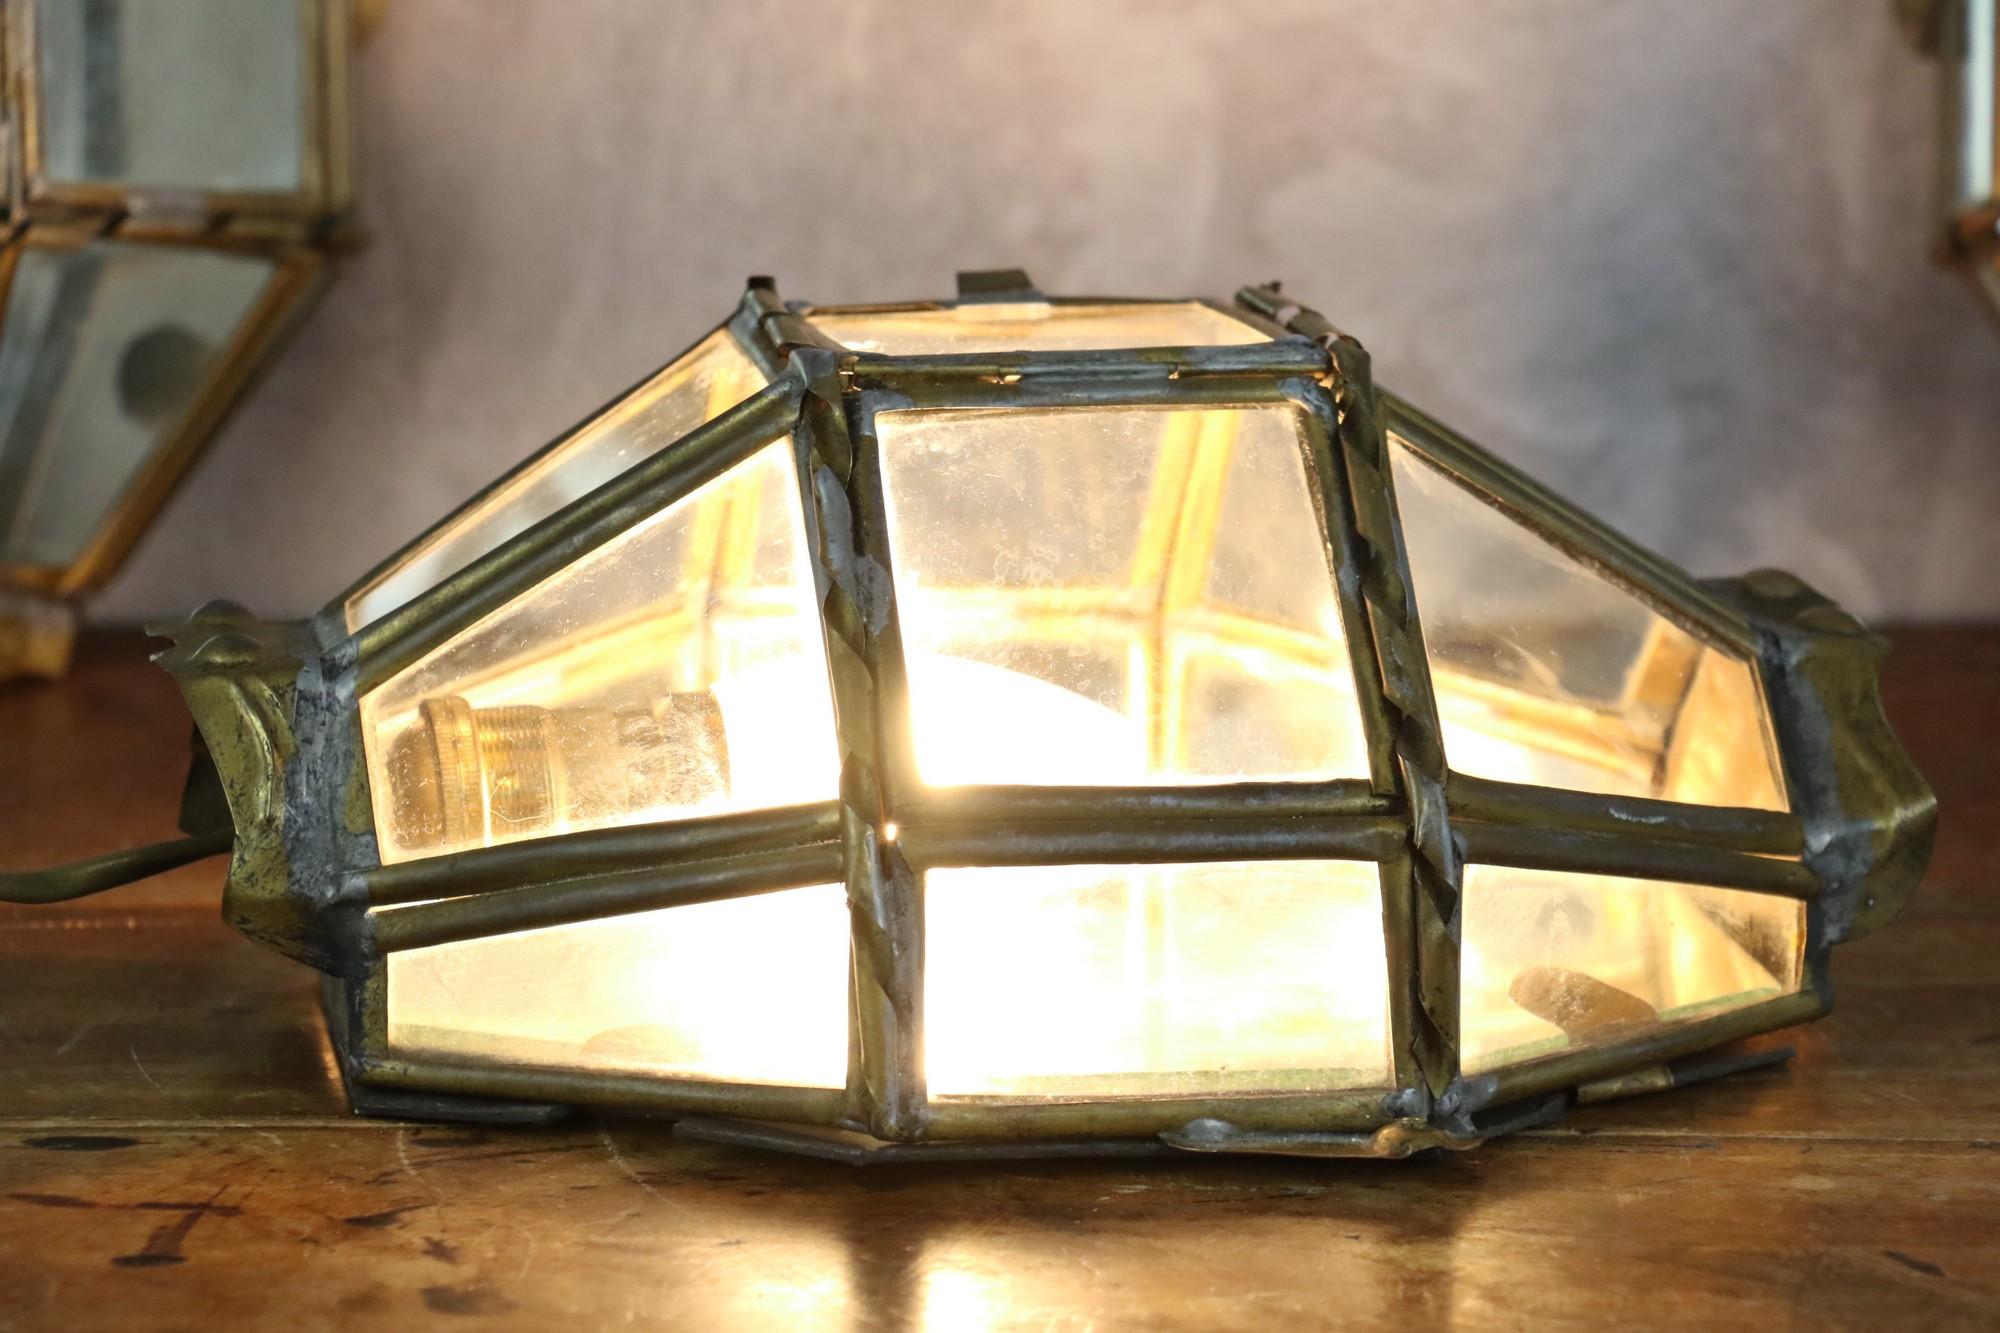 Trio of Brass and Glass Vintage Handcrafted Lantern Wall Lamps, 1940s, France 1